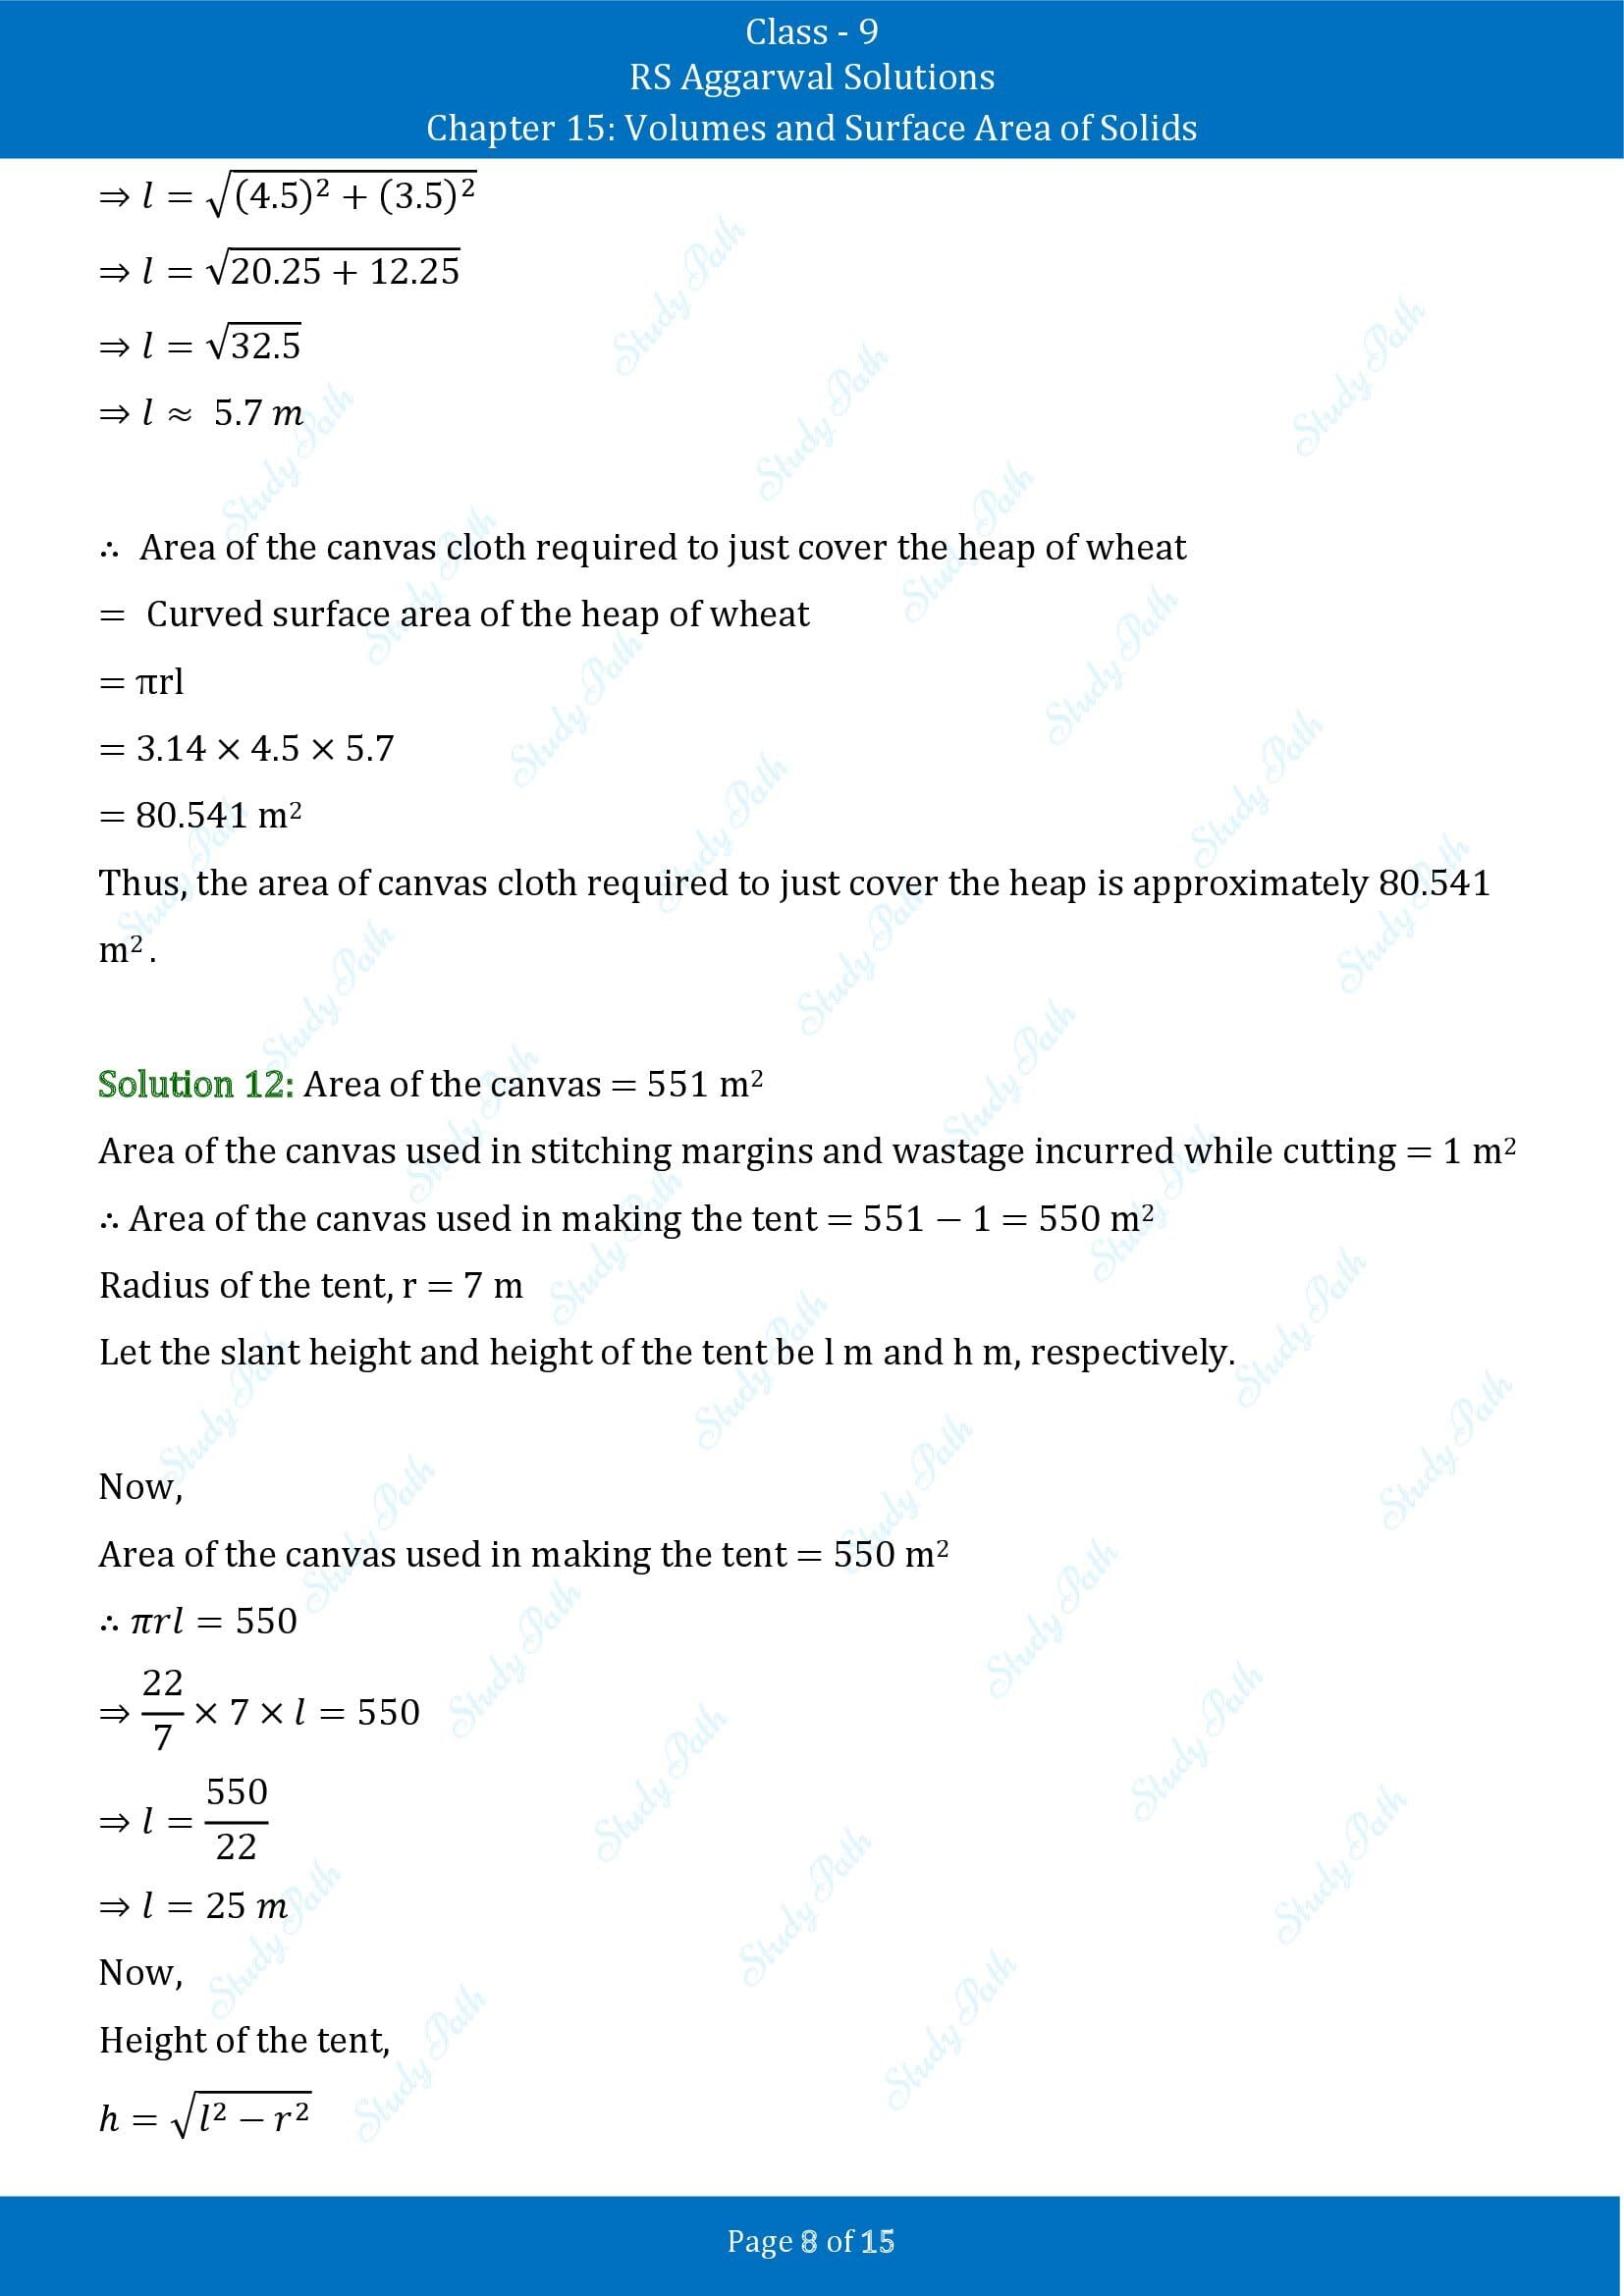 RS Aggarwal Solutions Class 9 Chapter 15 Volumes and Surface Area of Solids Exercise 15C 00008